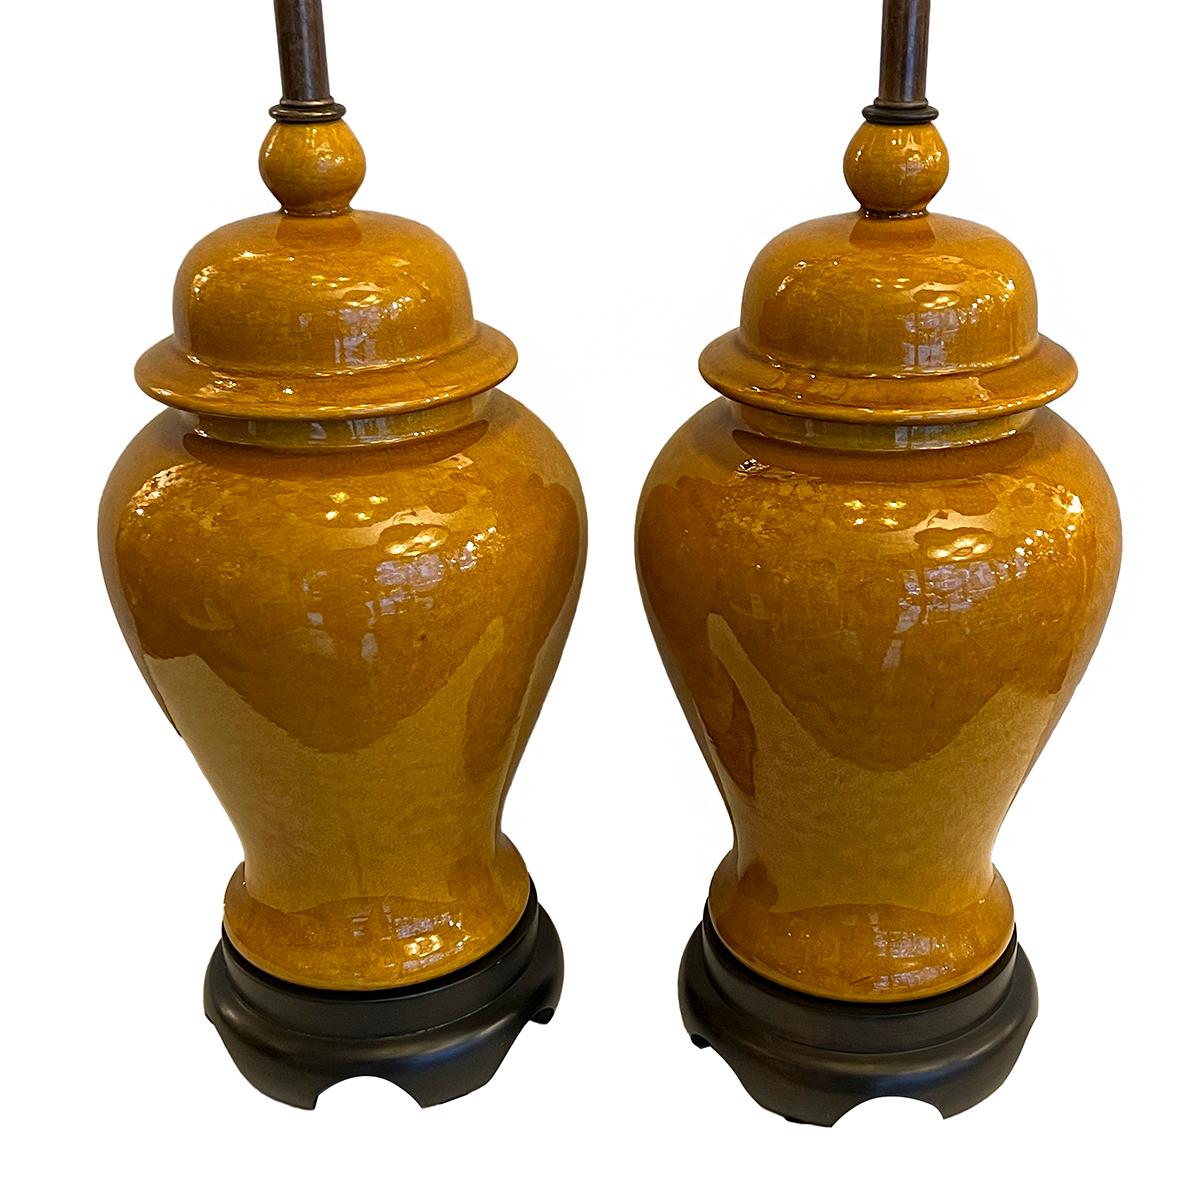 Pair of circa 1940’s French vintage ochre porcelain lamps mounted on wooden bases.

Measurements:
Height of body: 18?
Diameter: 8.25?.